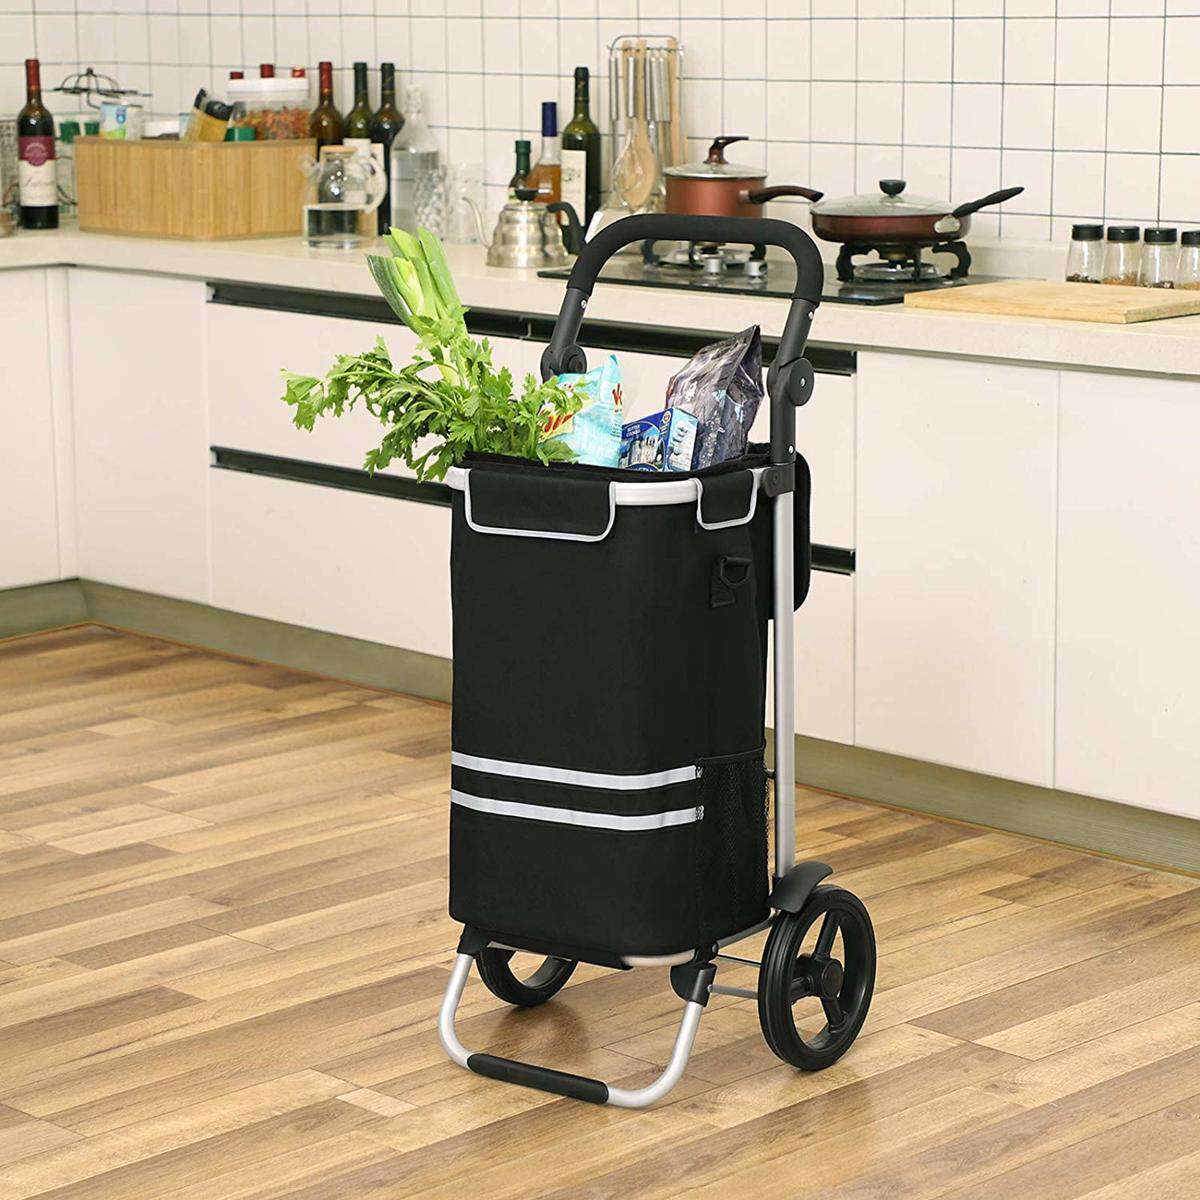 Nancy's Foldable Shopping Trolley - Shopping Trolleys with Wheels - Shopping Cart with Cooling